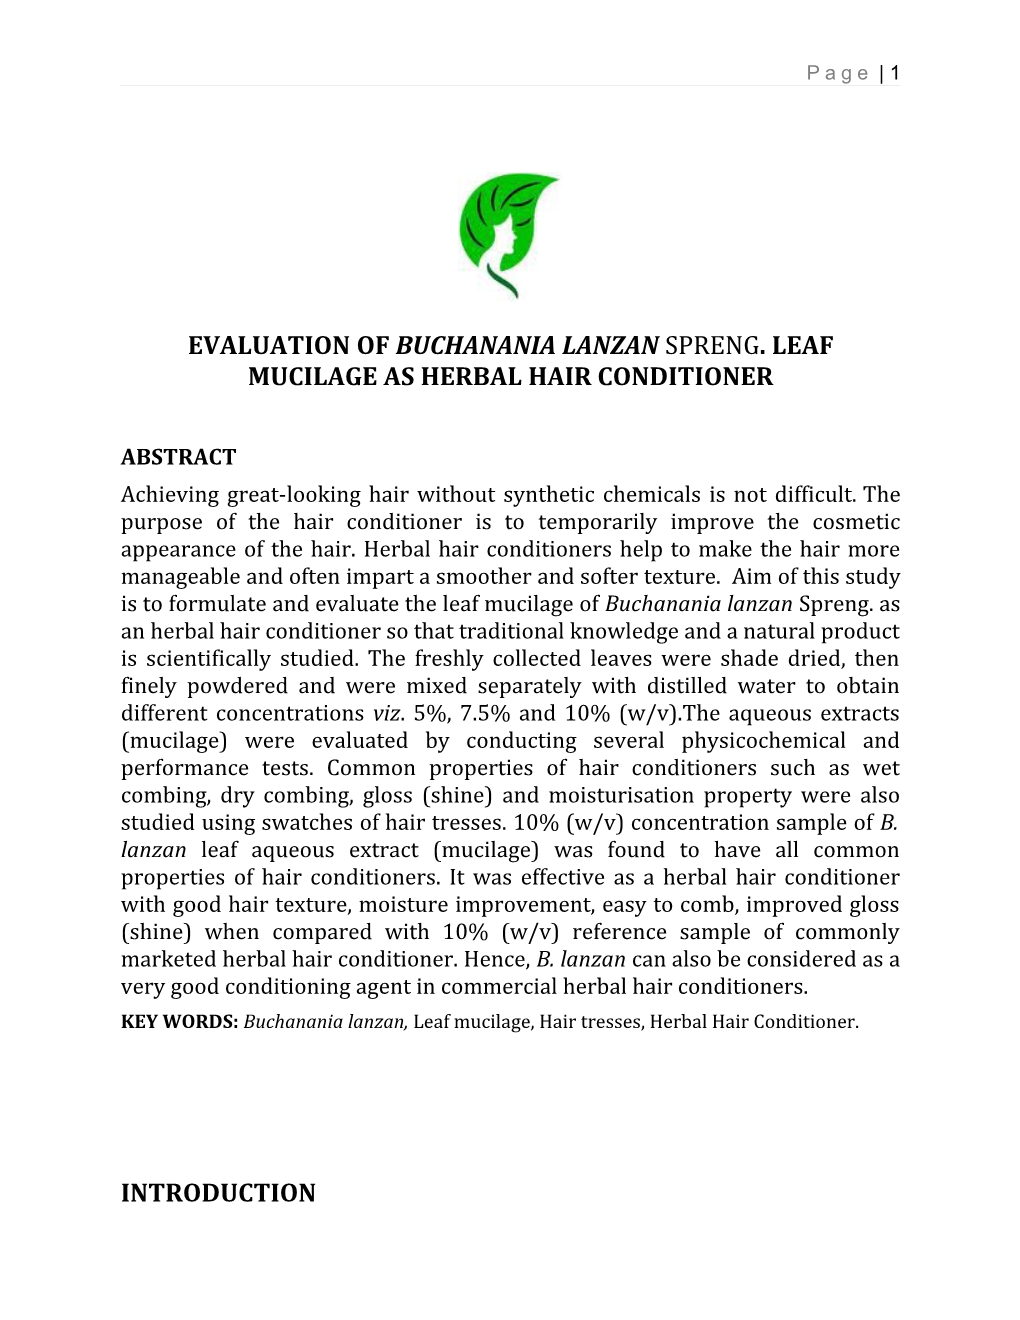 Evaluation of Buchanania Lanzanspreng. Leaf Mucilage As Herbal Hair Conditioner